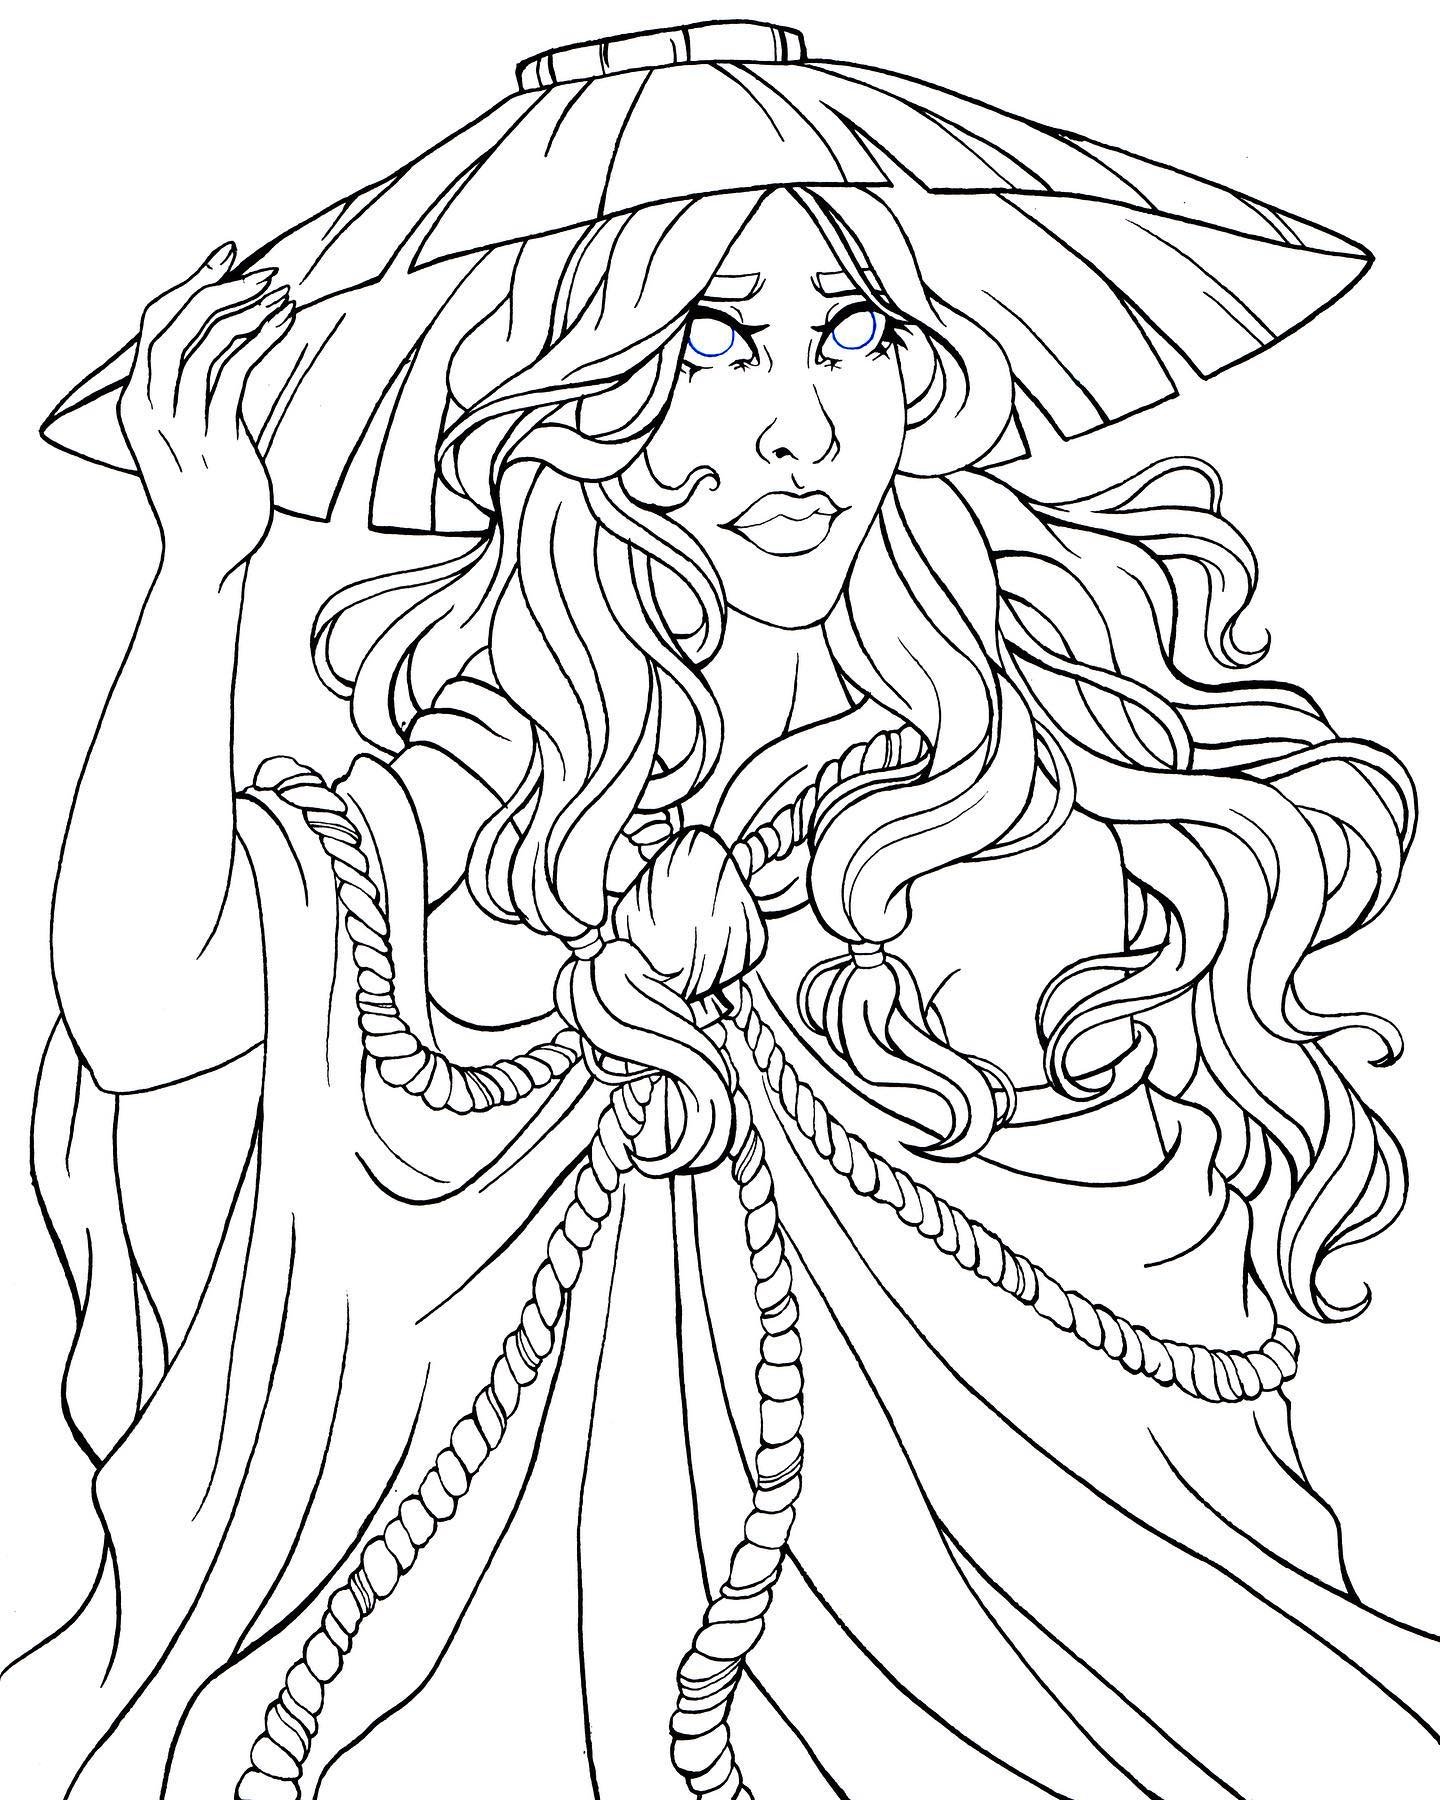 The Painted Lady lineart!

This is the next big piece I&rsquo;m working on. It&rsquo;s an 11x14, so a little larger than what I usually do. I&rsquo;m starting the painting process today, and I want it to have a dramatic lighting- wish me luck! 😅

#a